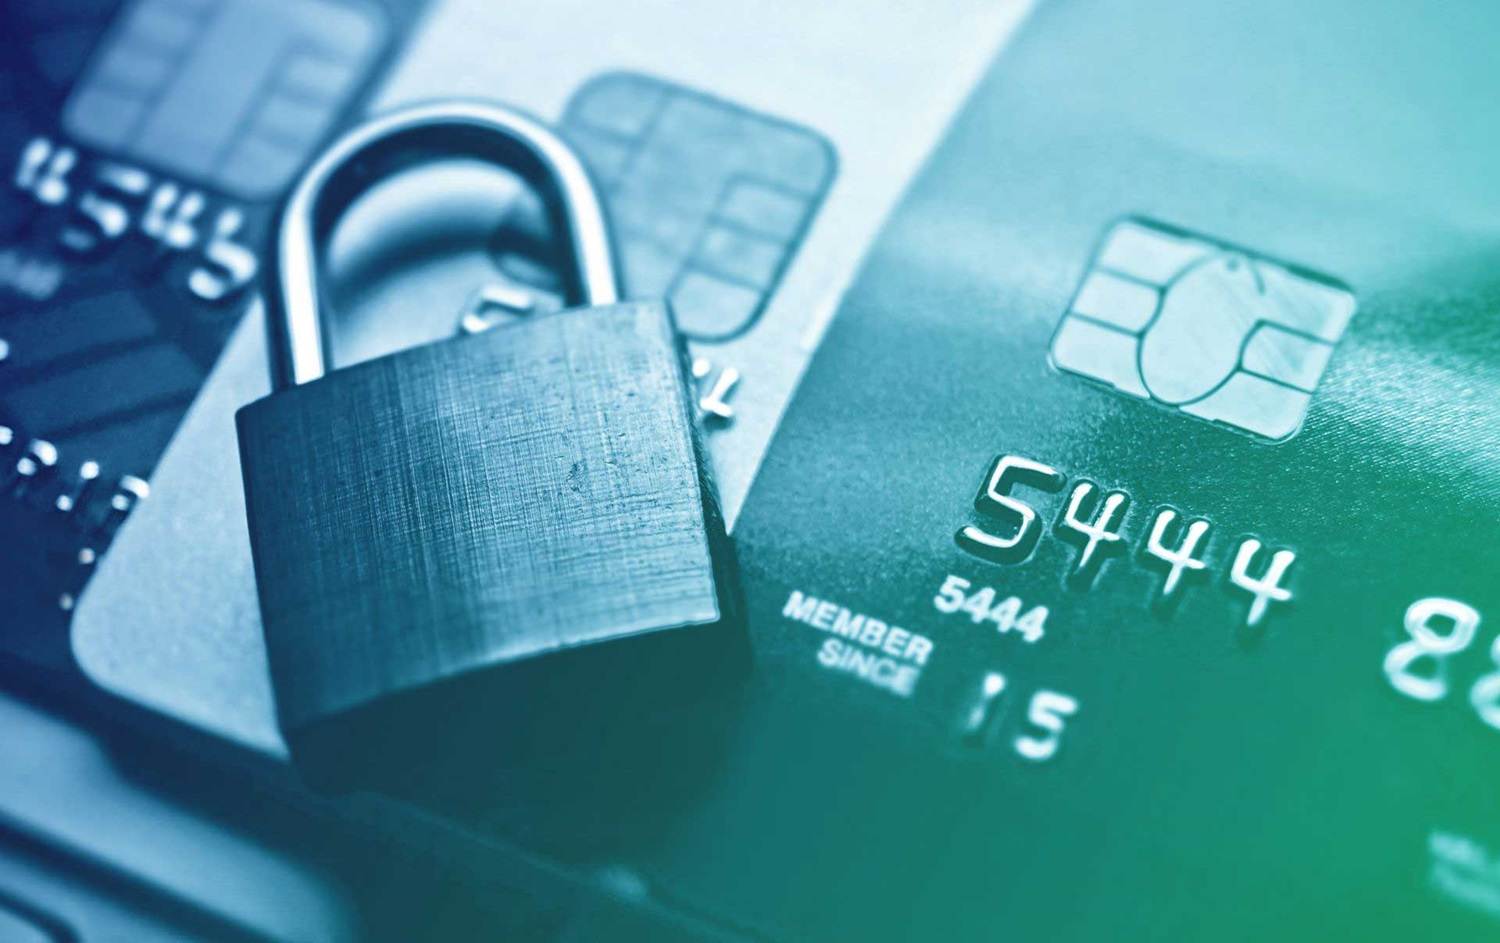 payment and security